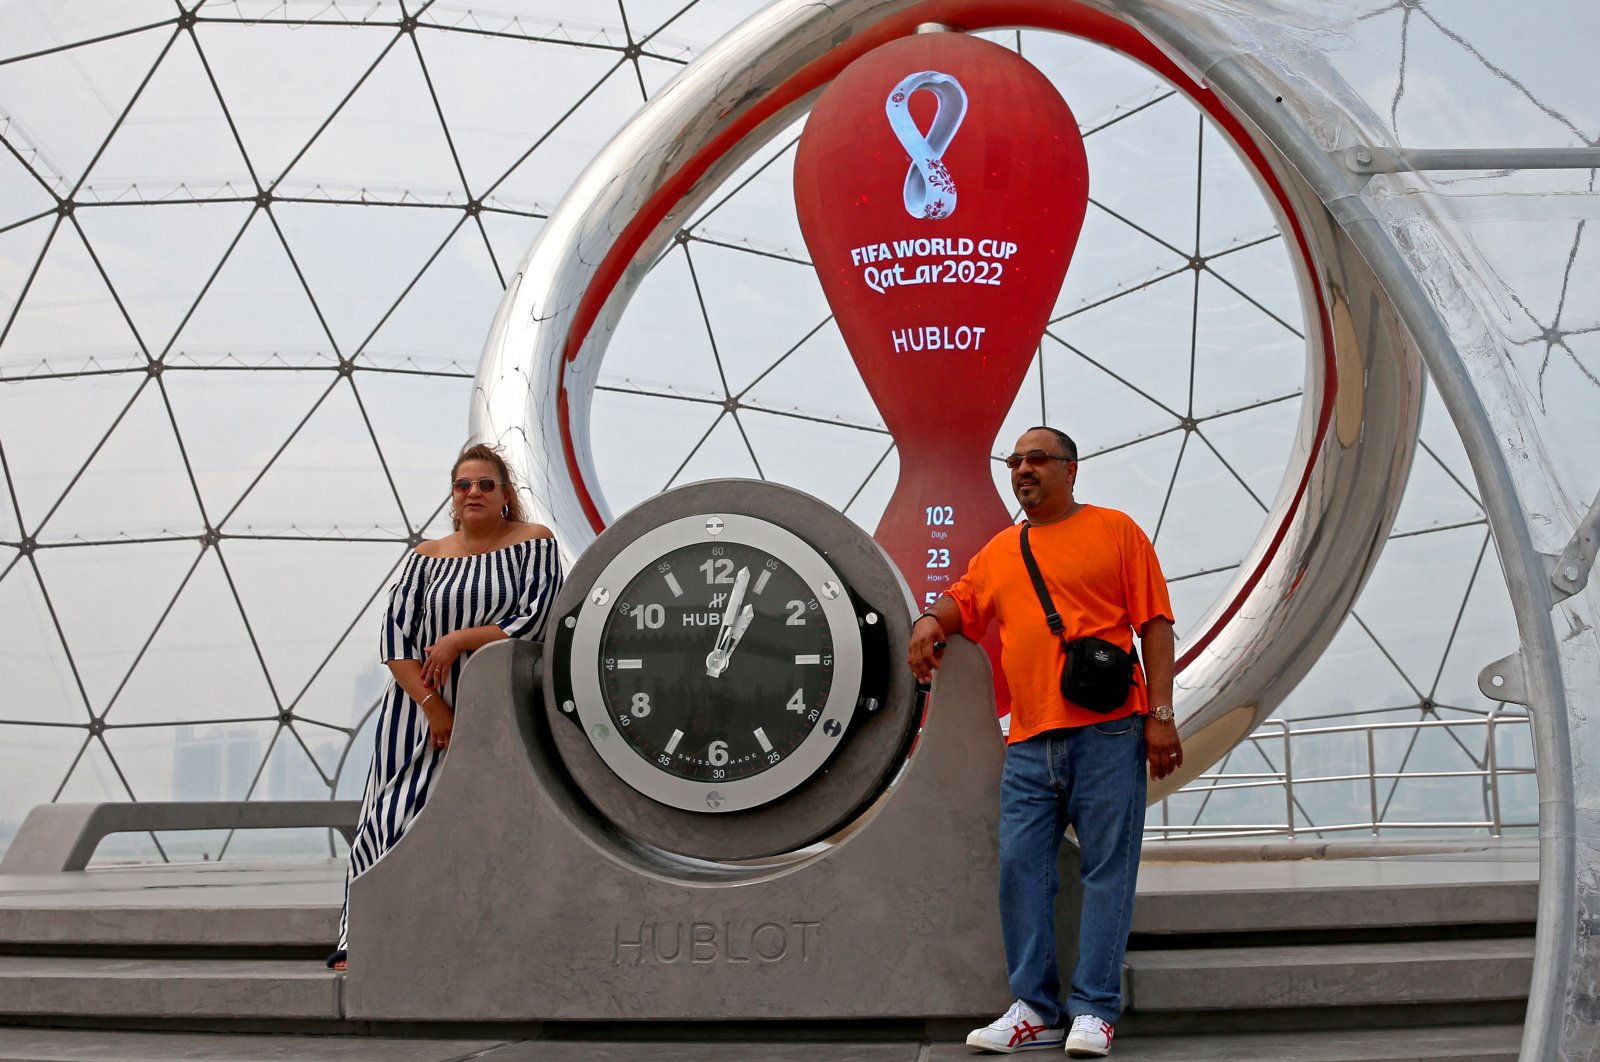 People pose for a picture with the Qatar 2022 FIFA World Cup countdown clock, Doha, Qatar, Aug. 10, 2022. (AFP Photo)